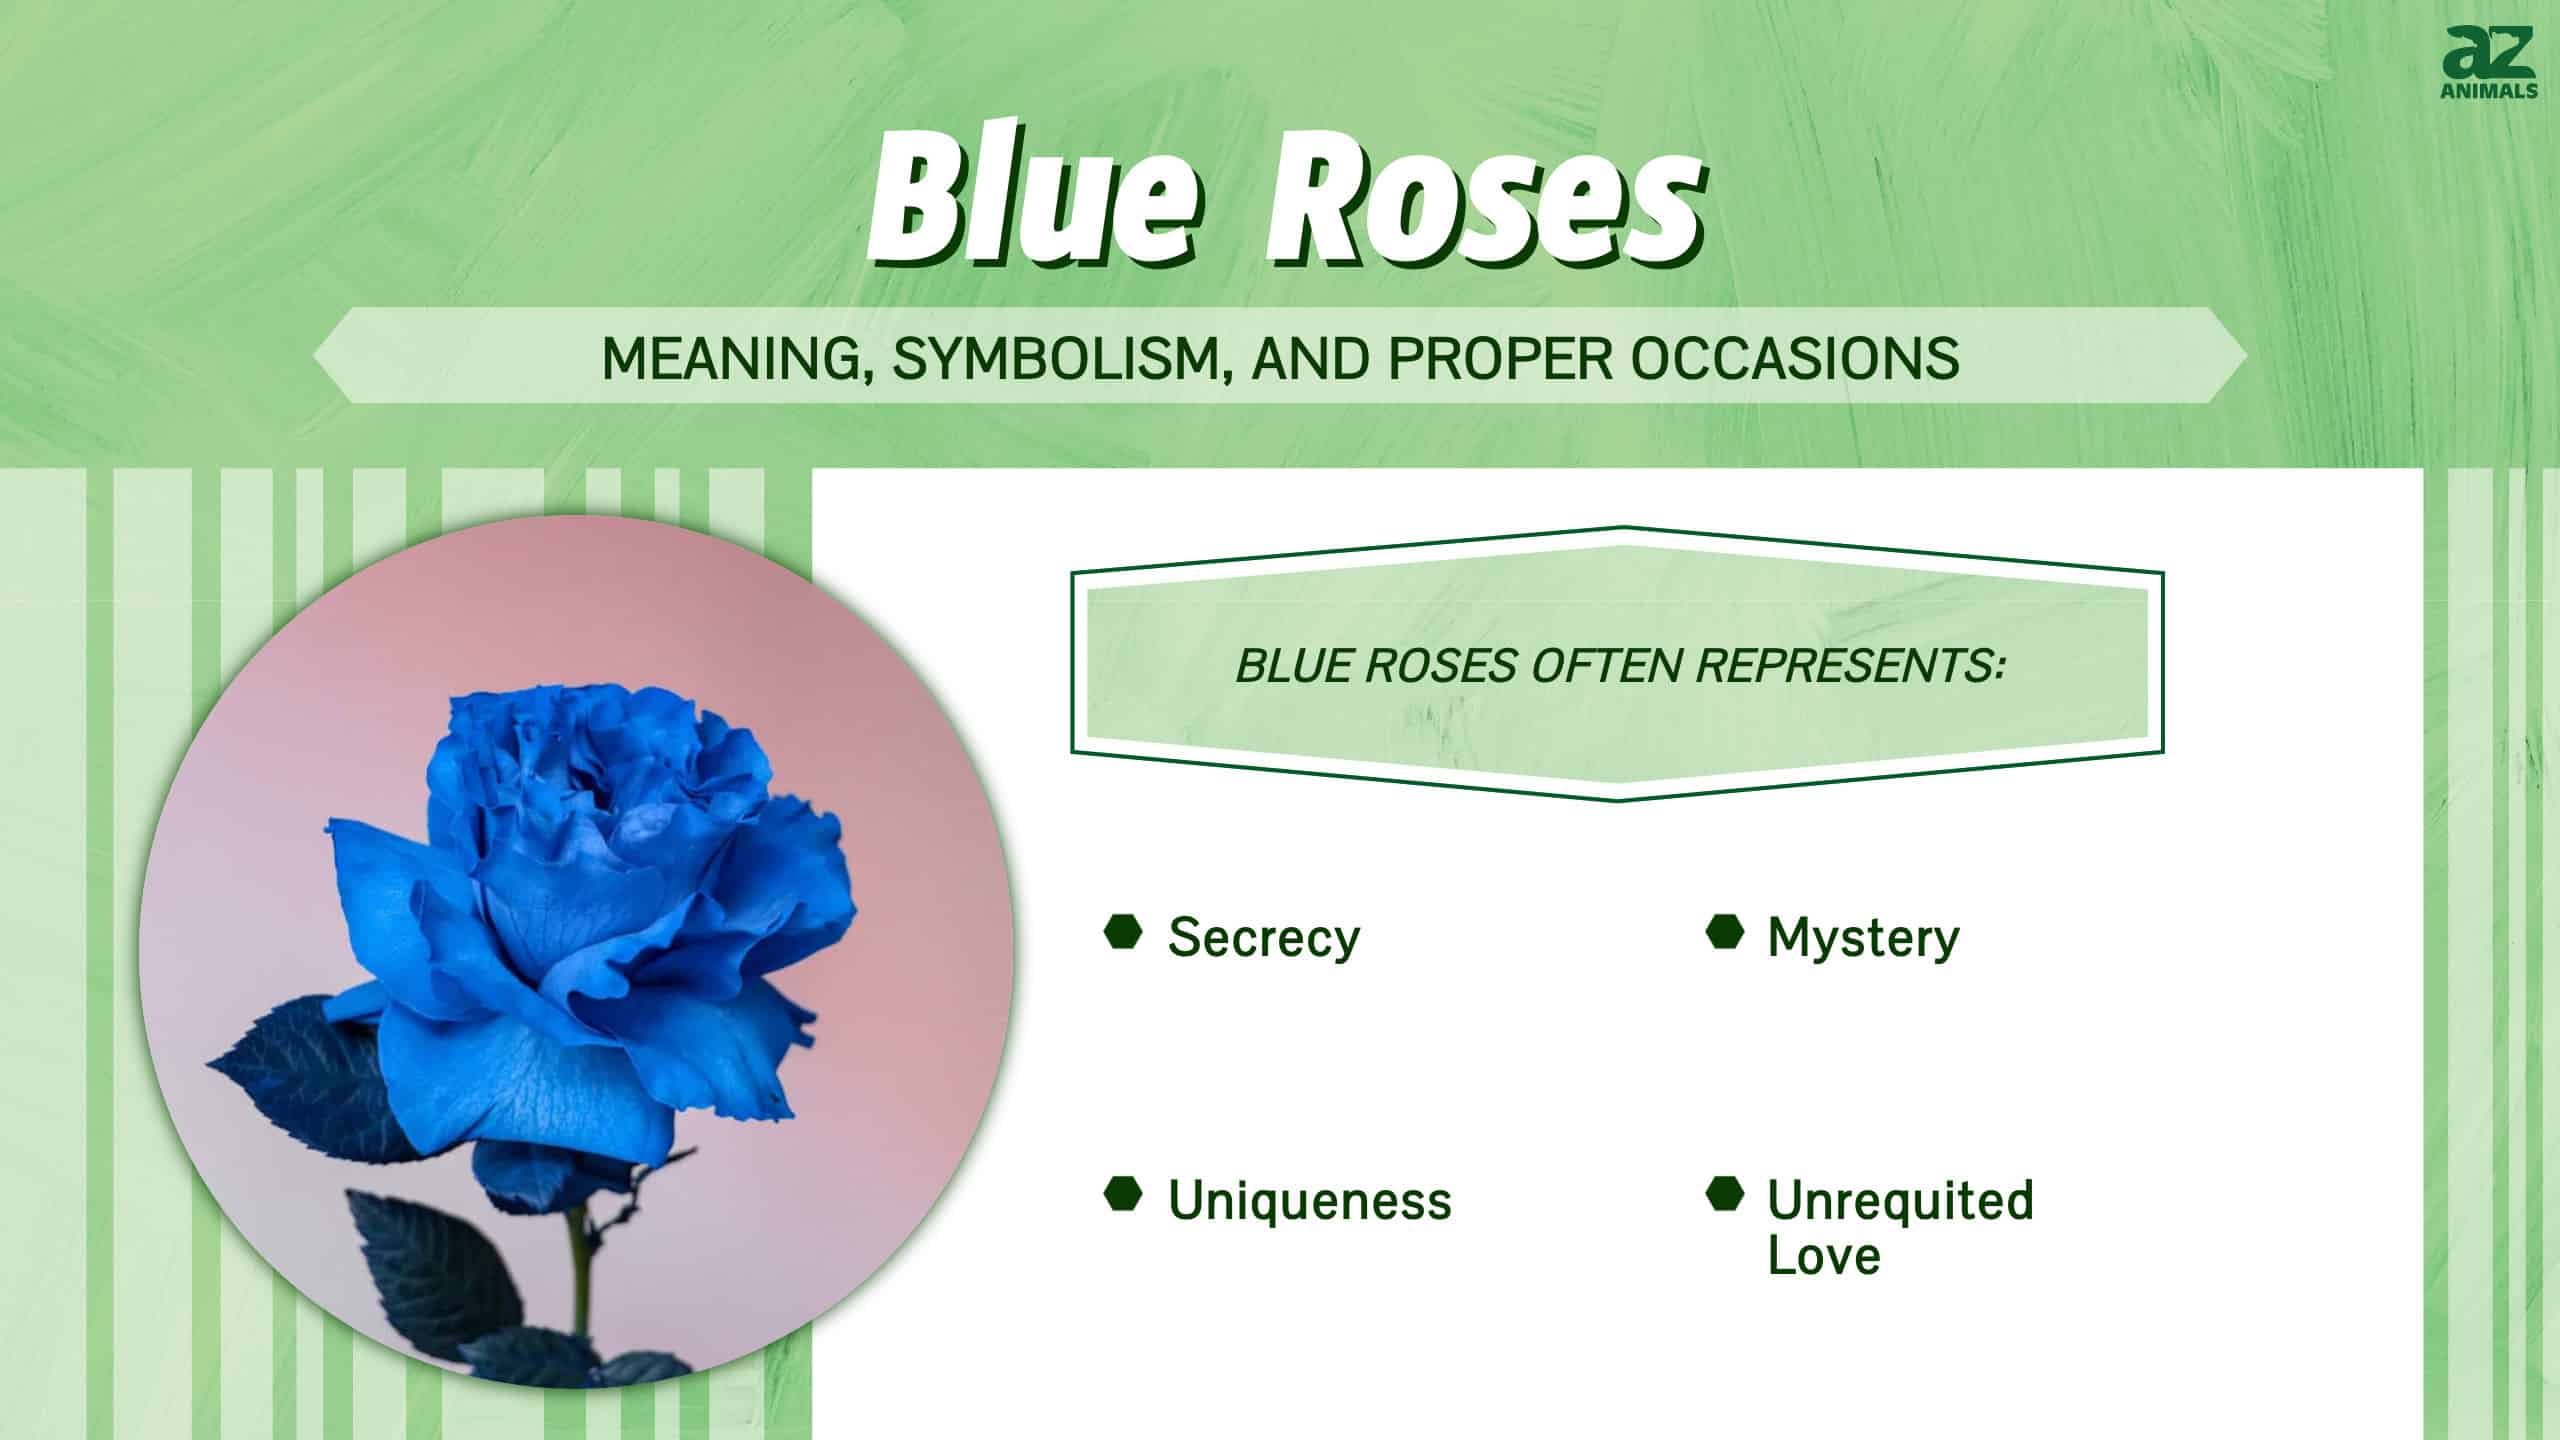 Blue Roses infographic